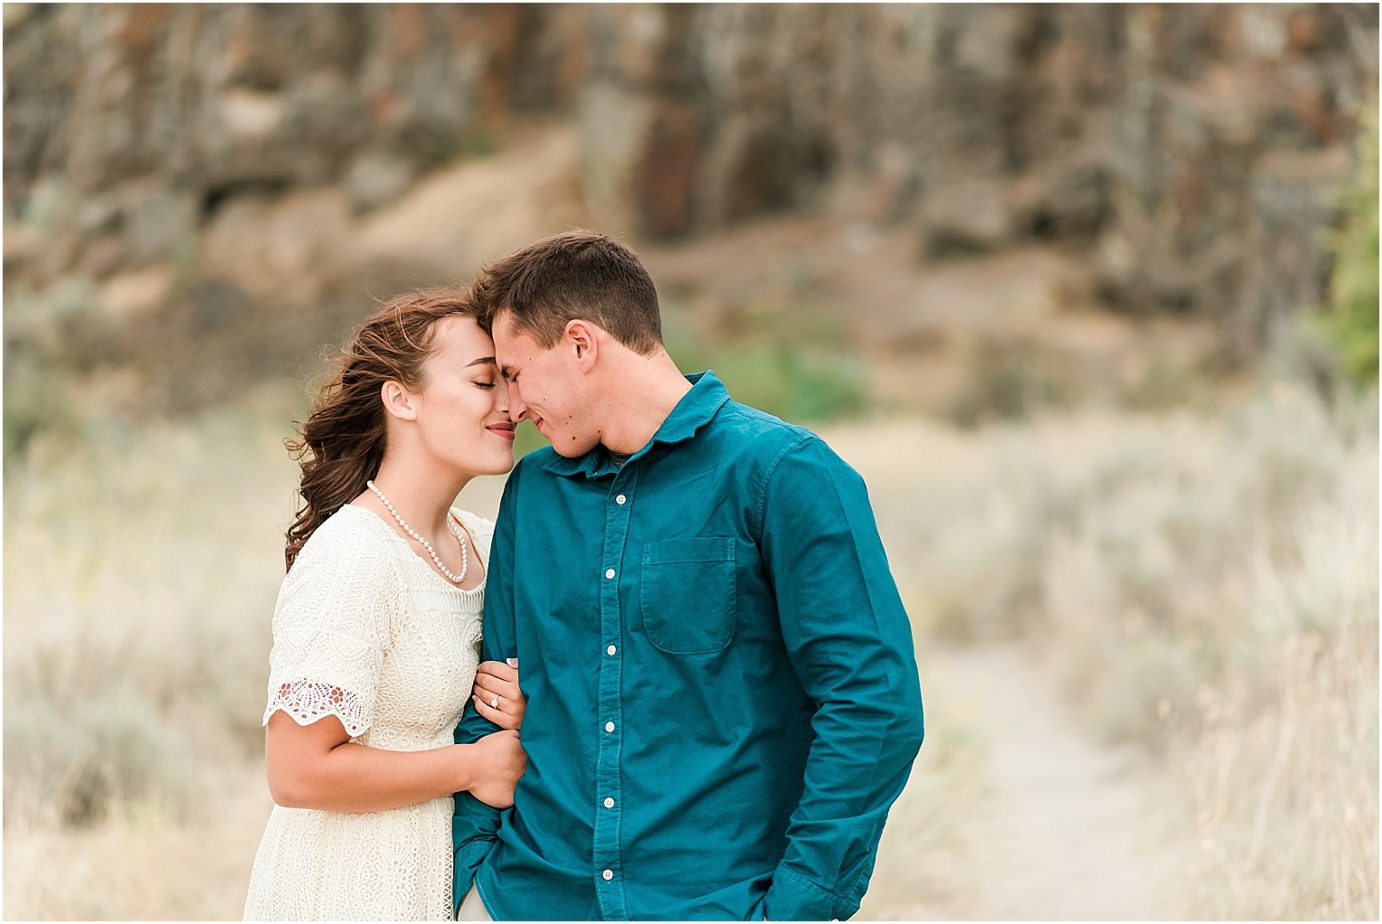 Desert Engagement Session Central WA Regan and Lindsey on path